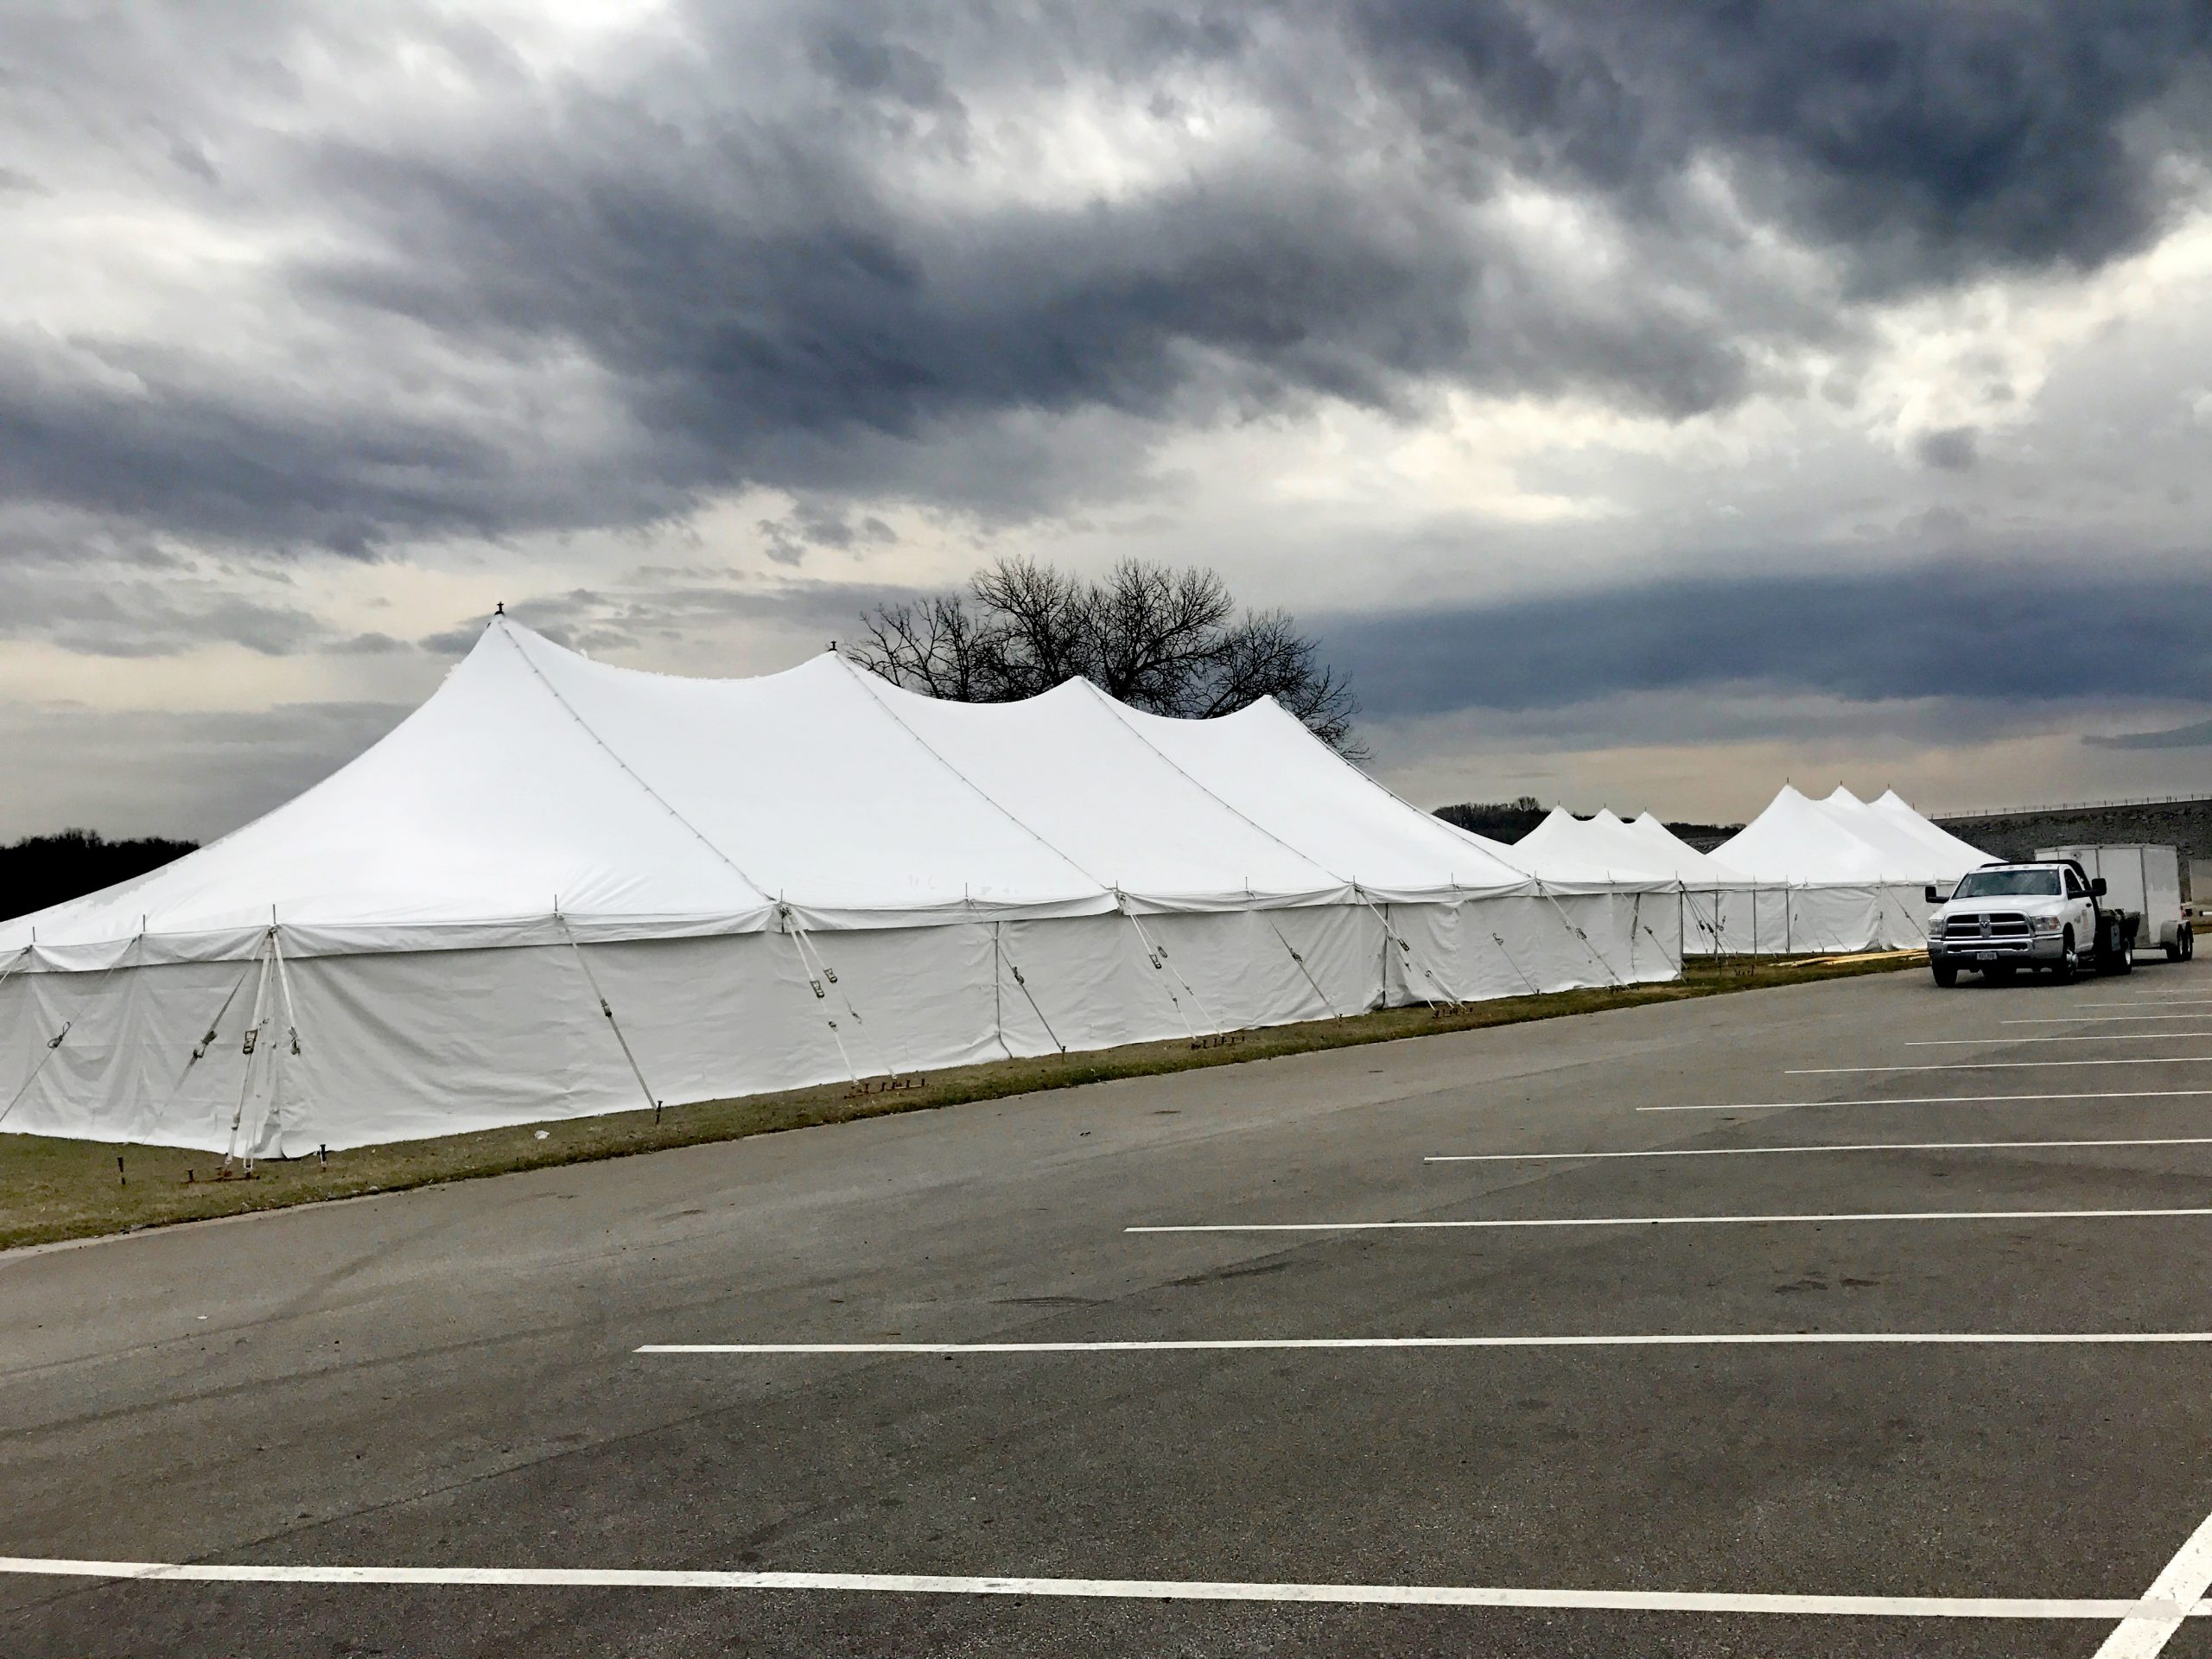 40' x 100' Elite rope and pole tent (left), 20' x 40' rope and pole tent (middle), 30' x 60' rope and pole tent (right) for Special Olympics Polar Plunge 2017